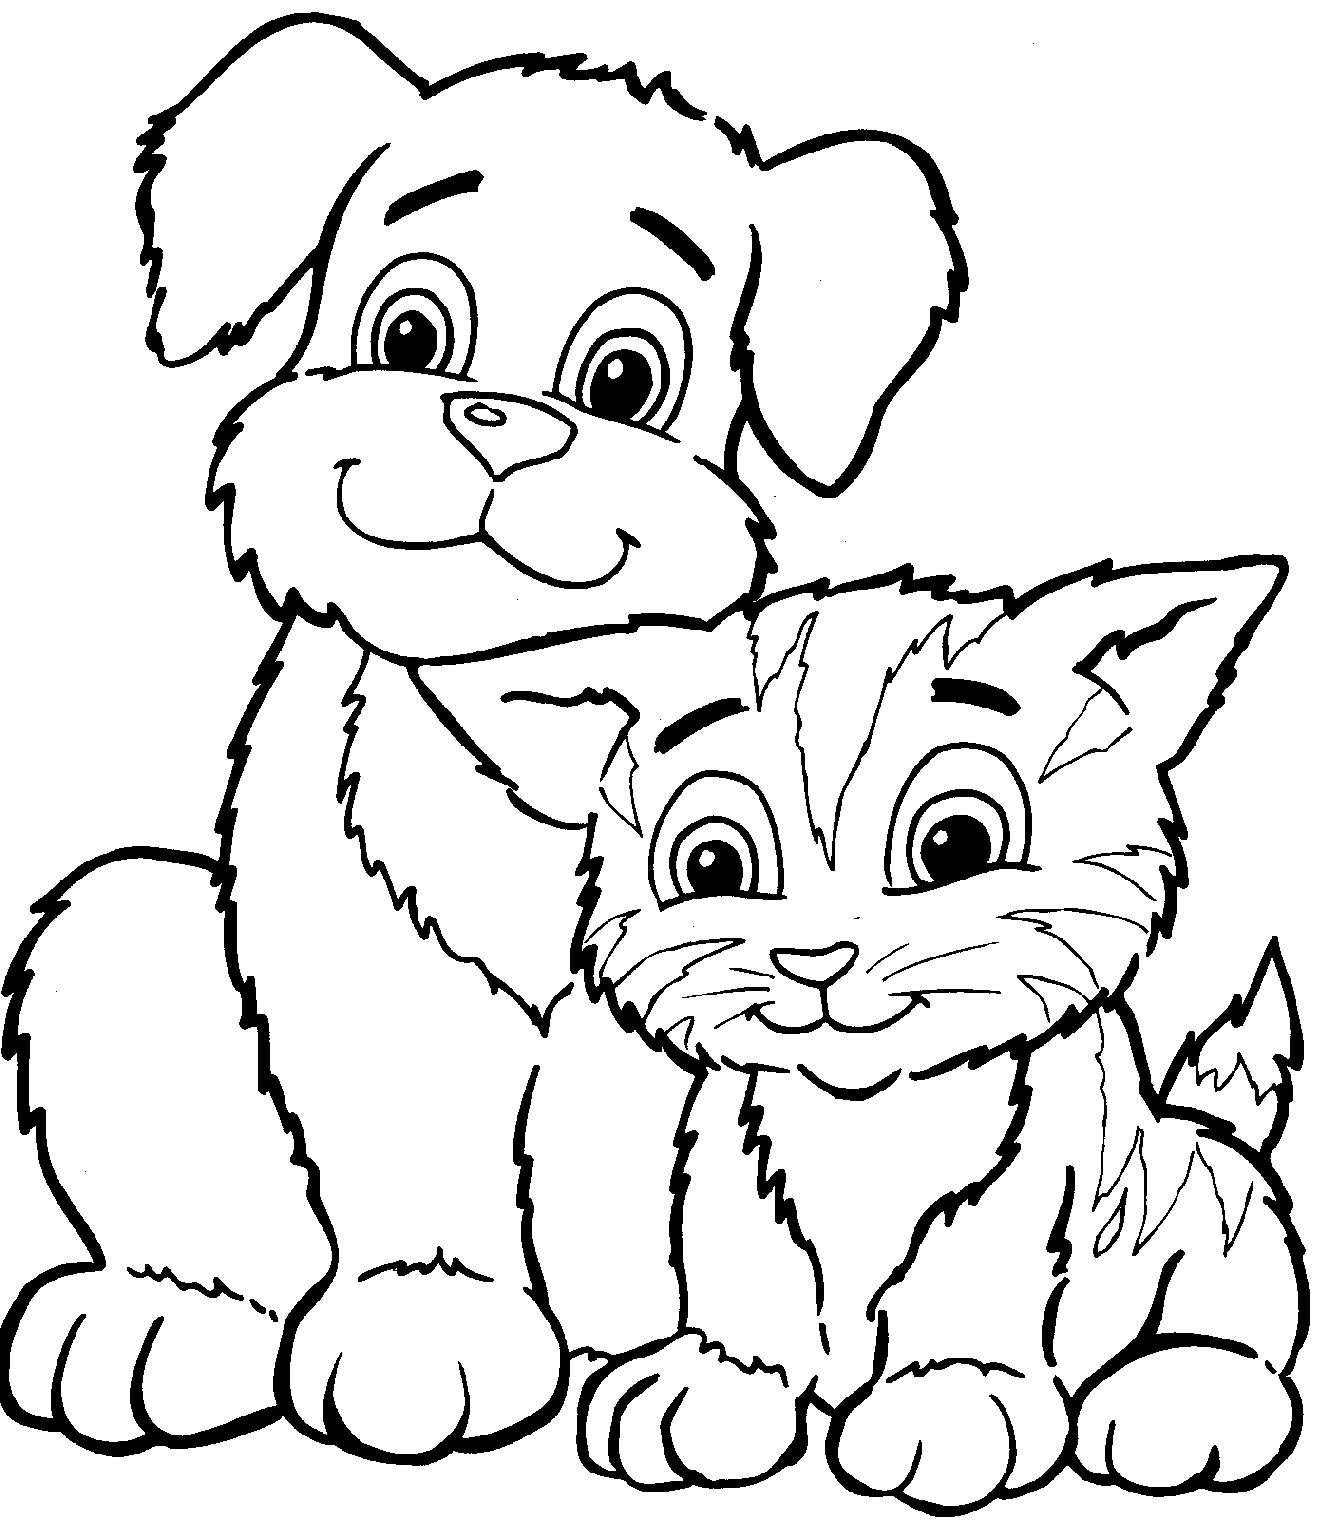 Free Printable Cat Coloring Pages For Kids | Dog coloring ...